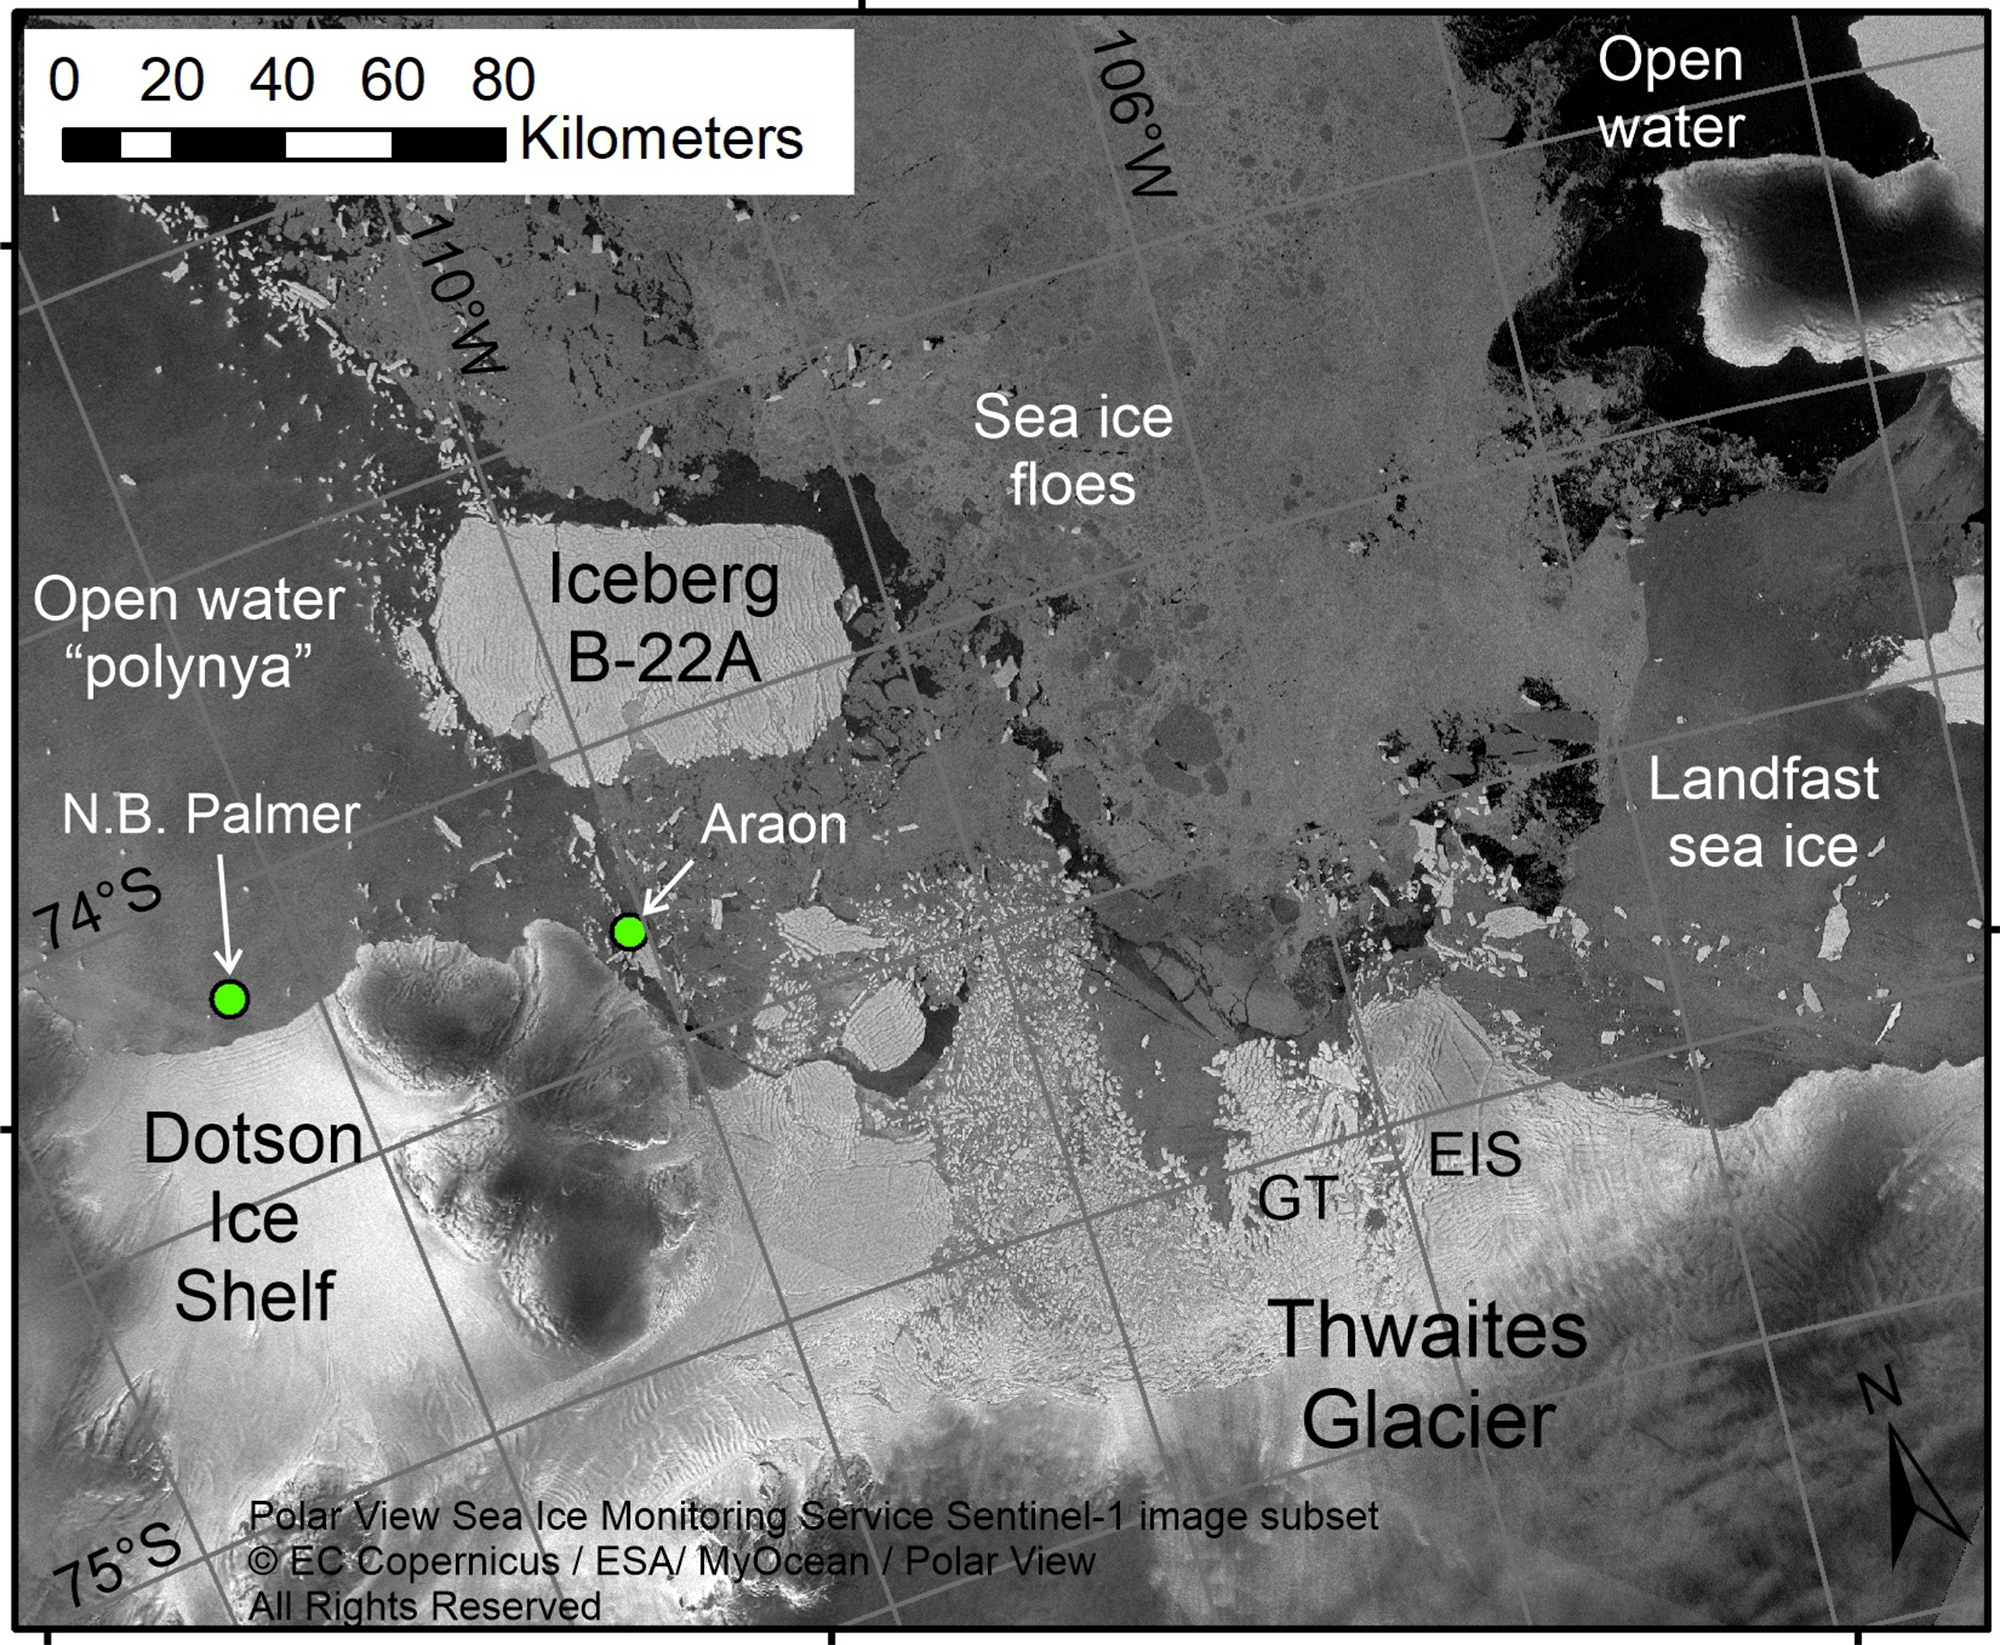 A satellite image from the European Space Agency, annotated by marine geophysicist Robert Larter, showing the positions of research vessels in Antarctica